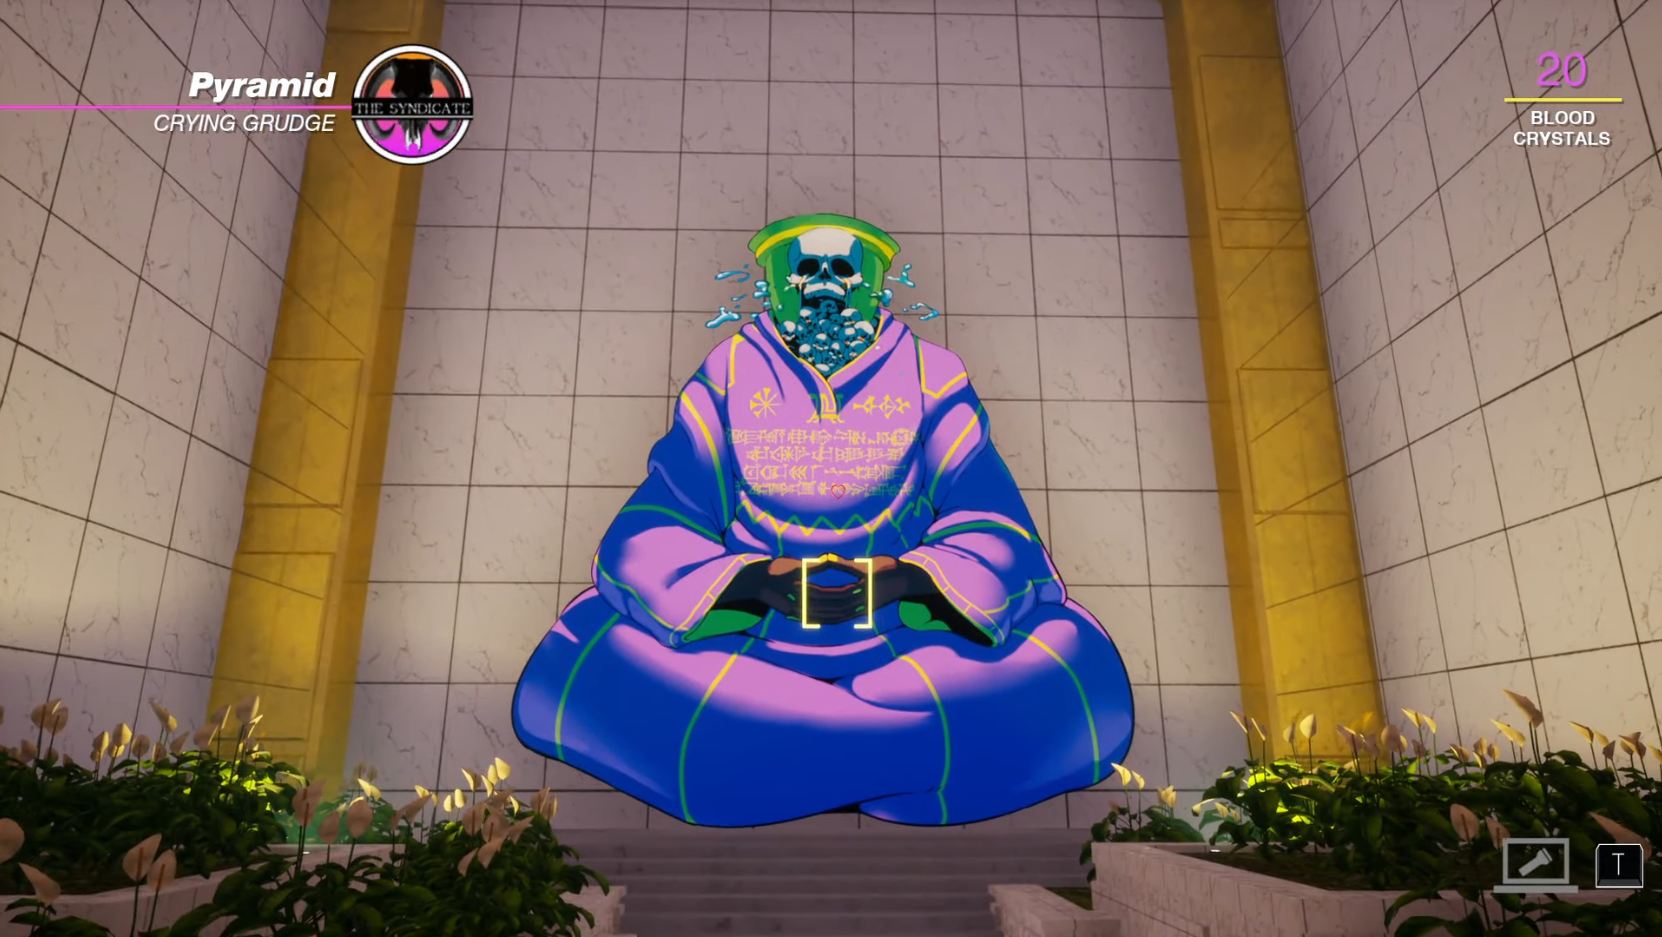 The god Crying Grudge, sitting in a meditative pose with his hands clasped in a tiled prison, a skull for a head trapped in glass, looks down upon the player